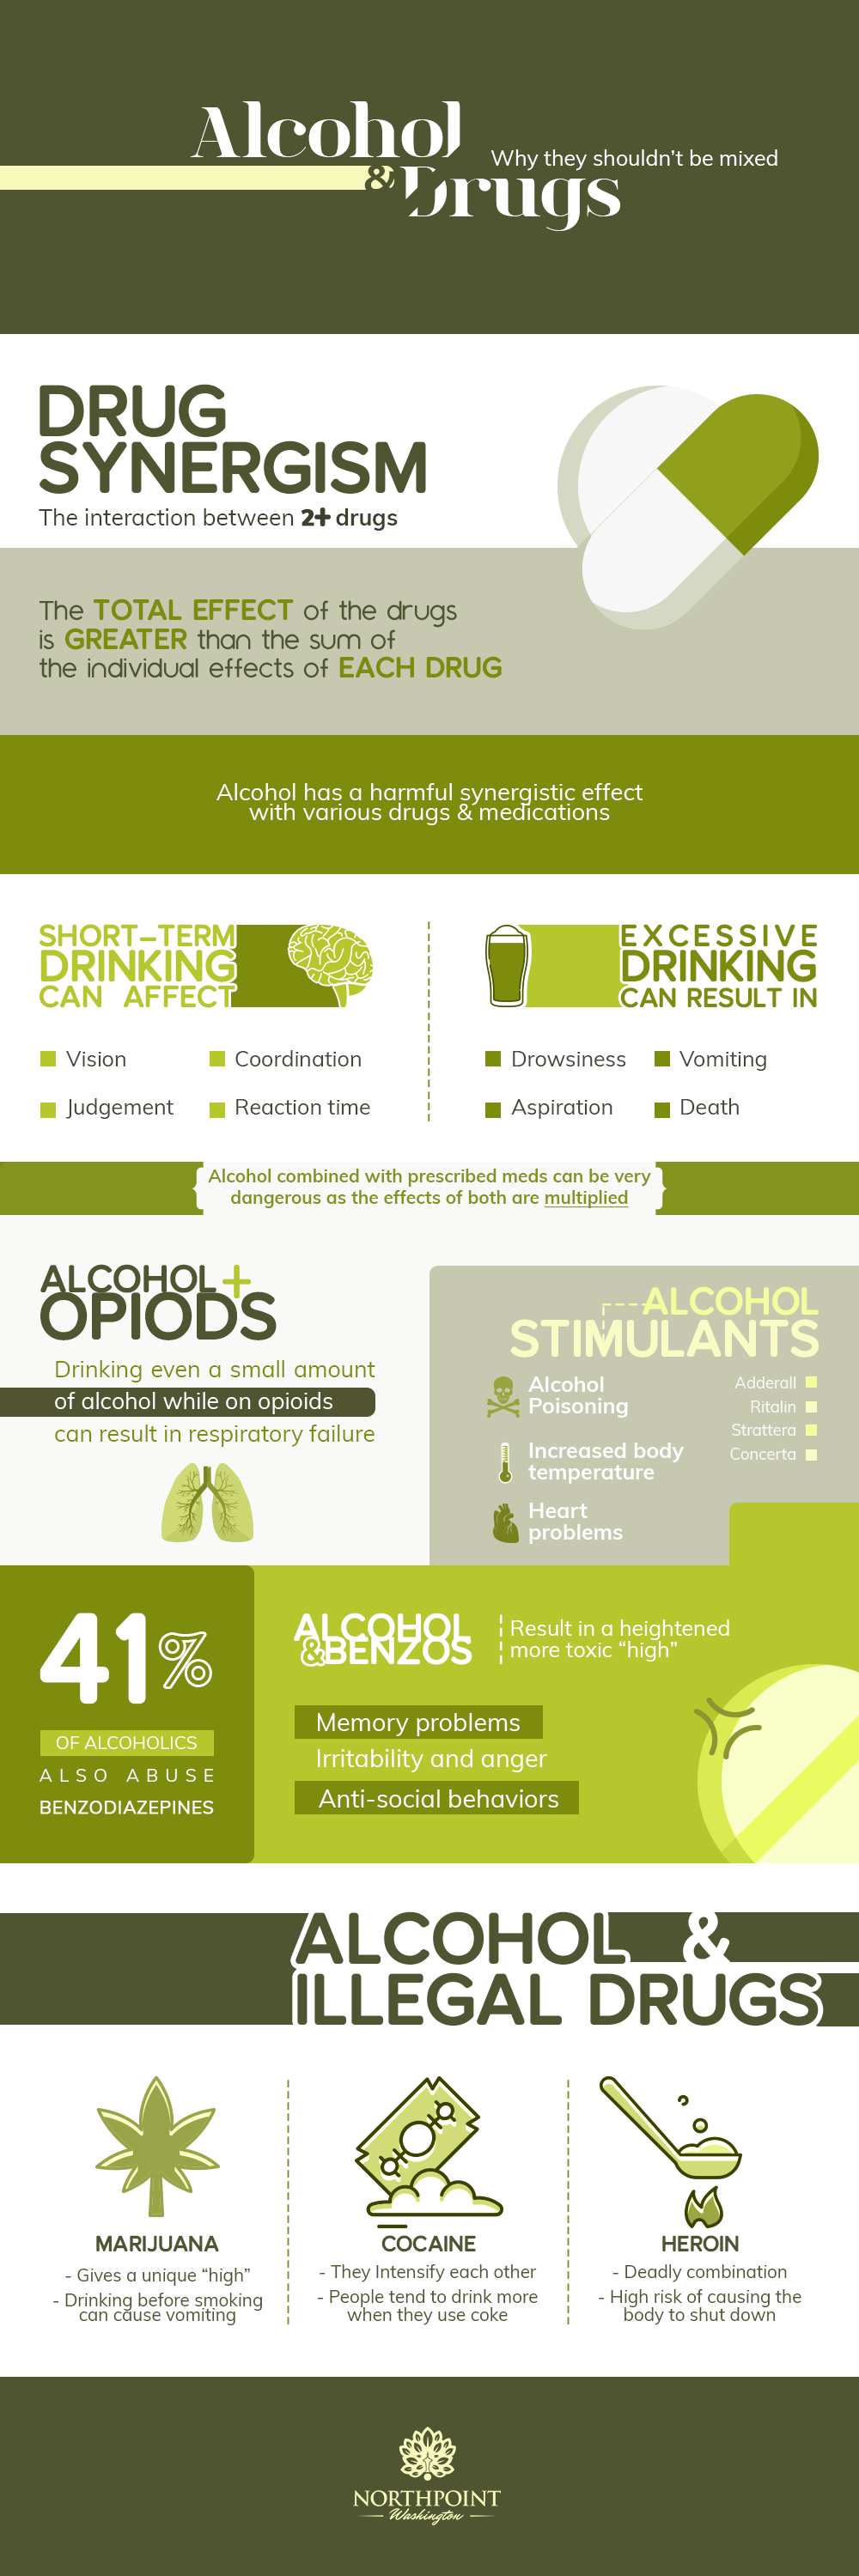 Alcohol Drug Interactions Infographic